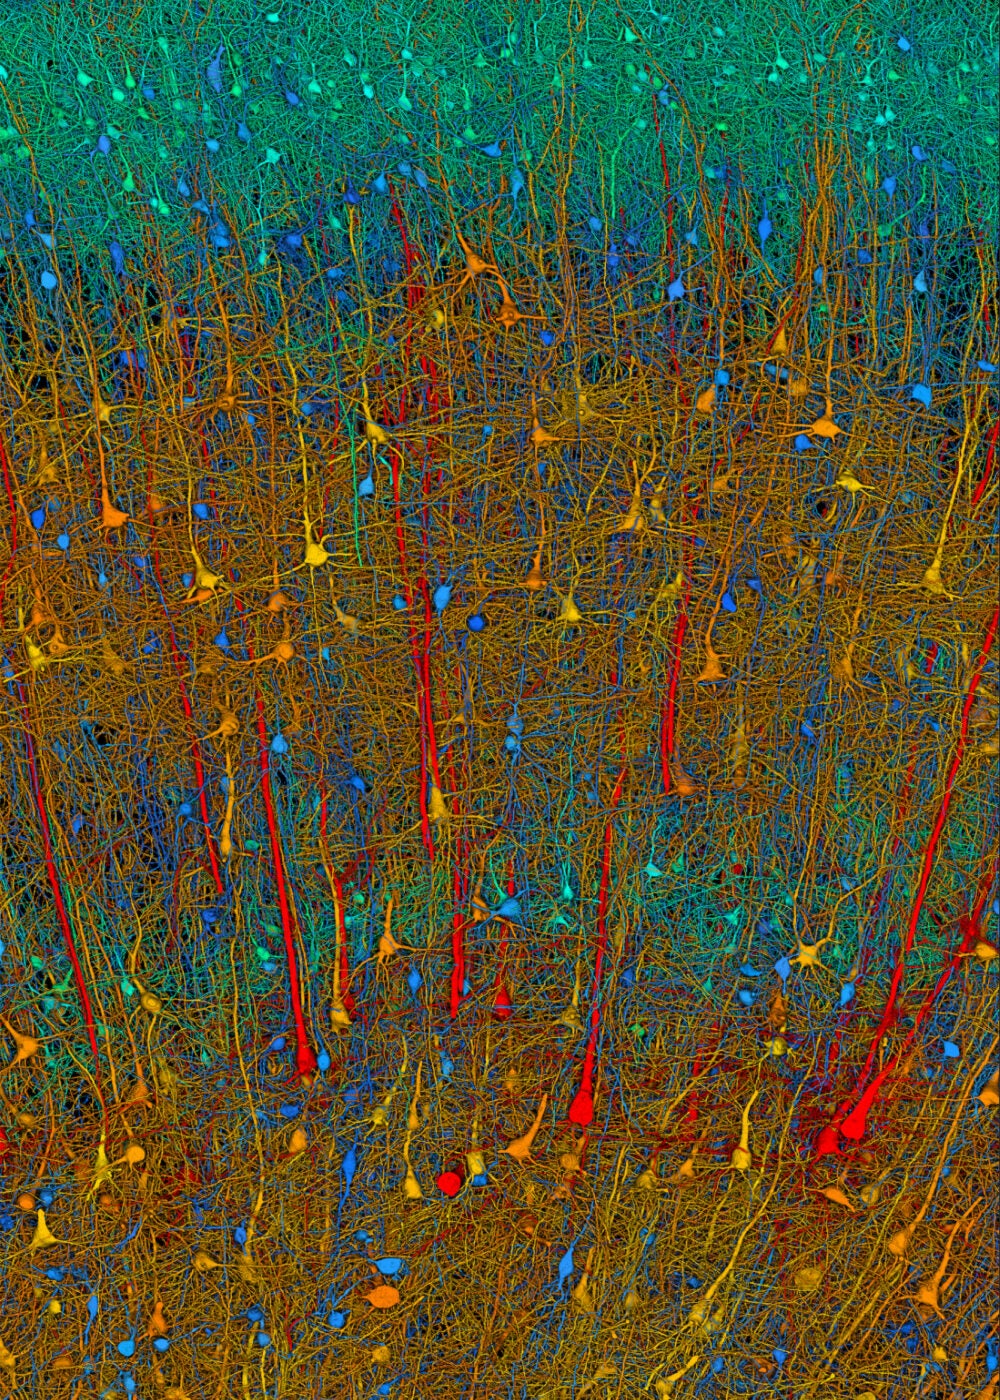 Microscopic image of brain with color-coded cells.